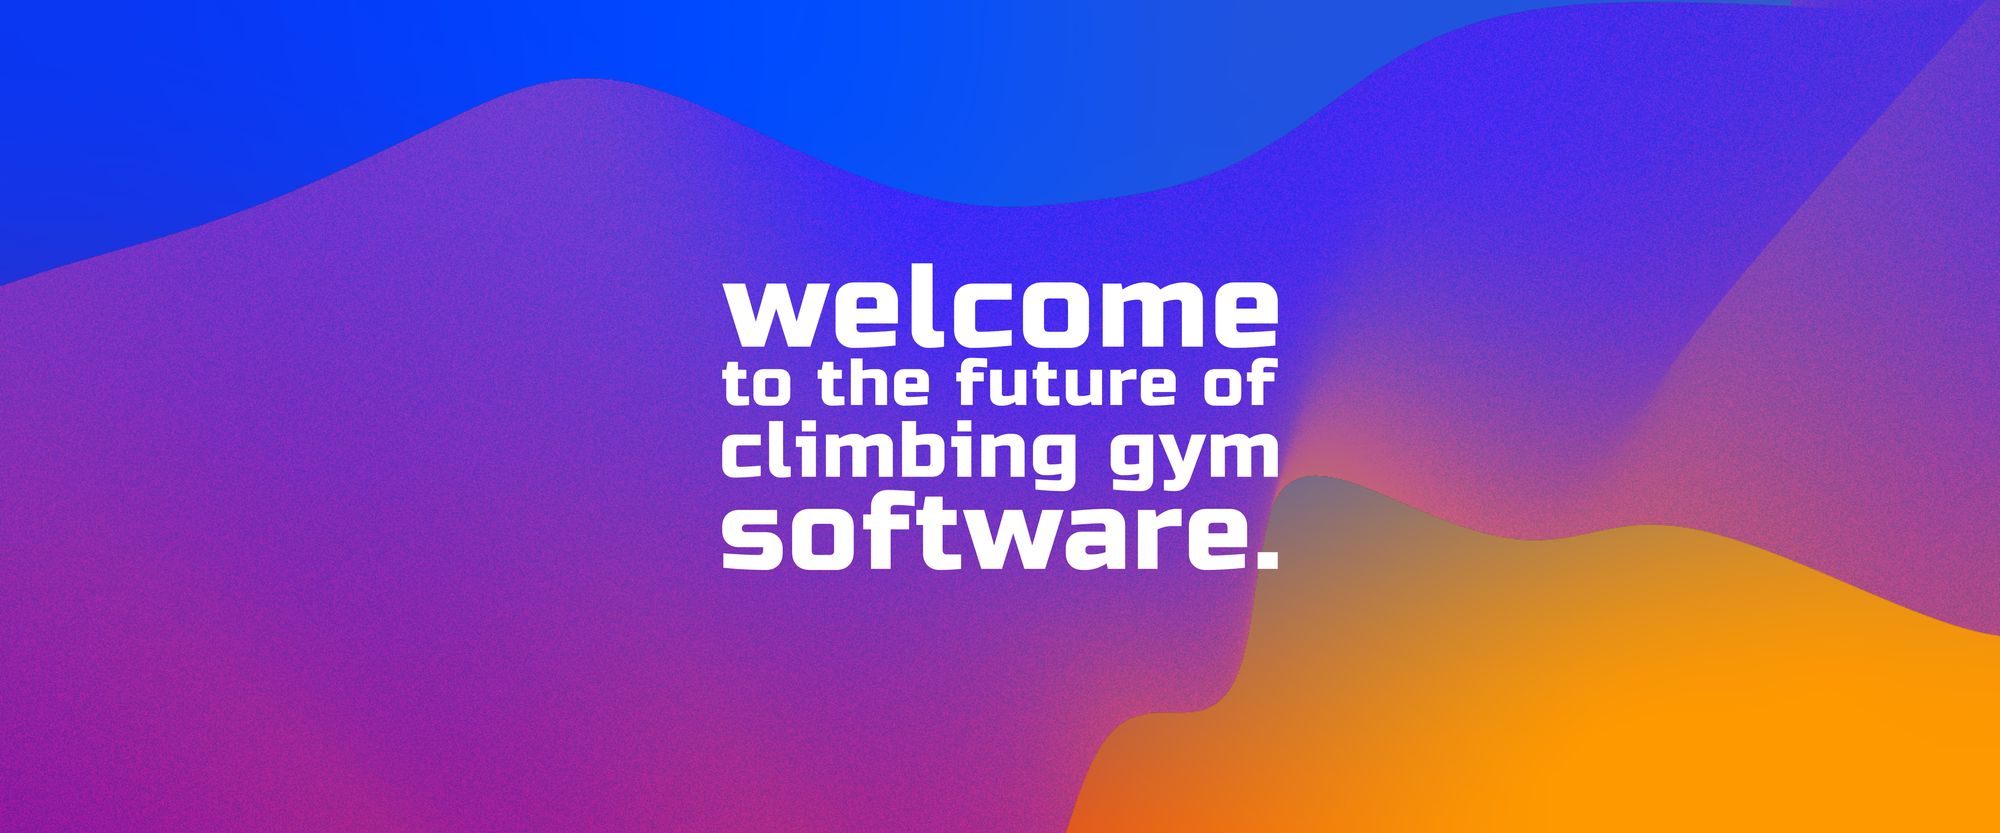 welcome to the future of climbing gym software